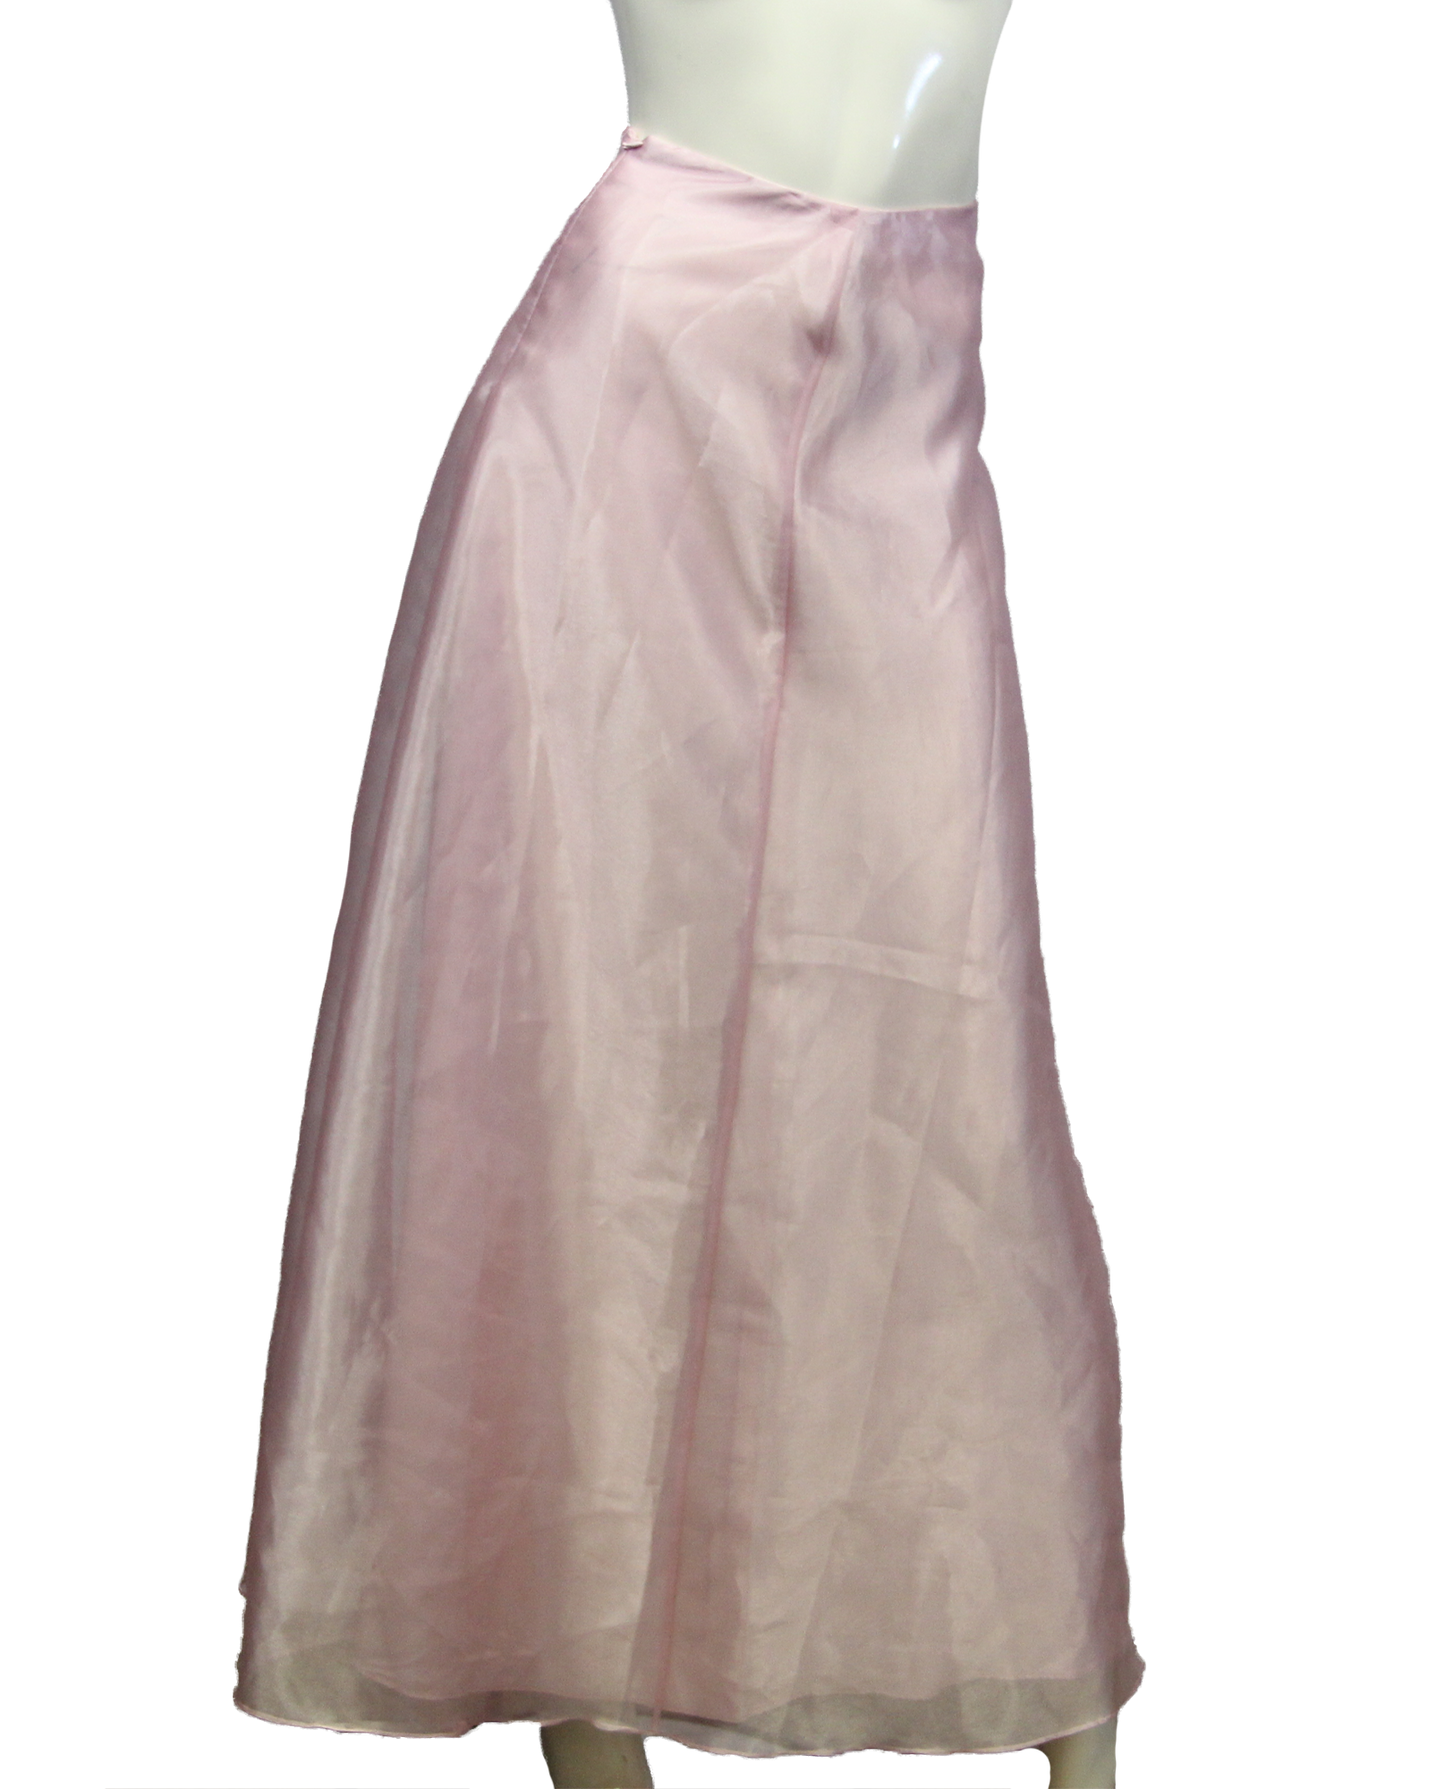 Load image into Gallery viewer, Belle of the Ball Maxi Pink Skirt Size S (SKU 000026) - Designers On A Dime - 4
